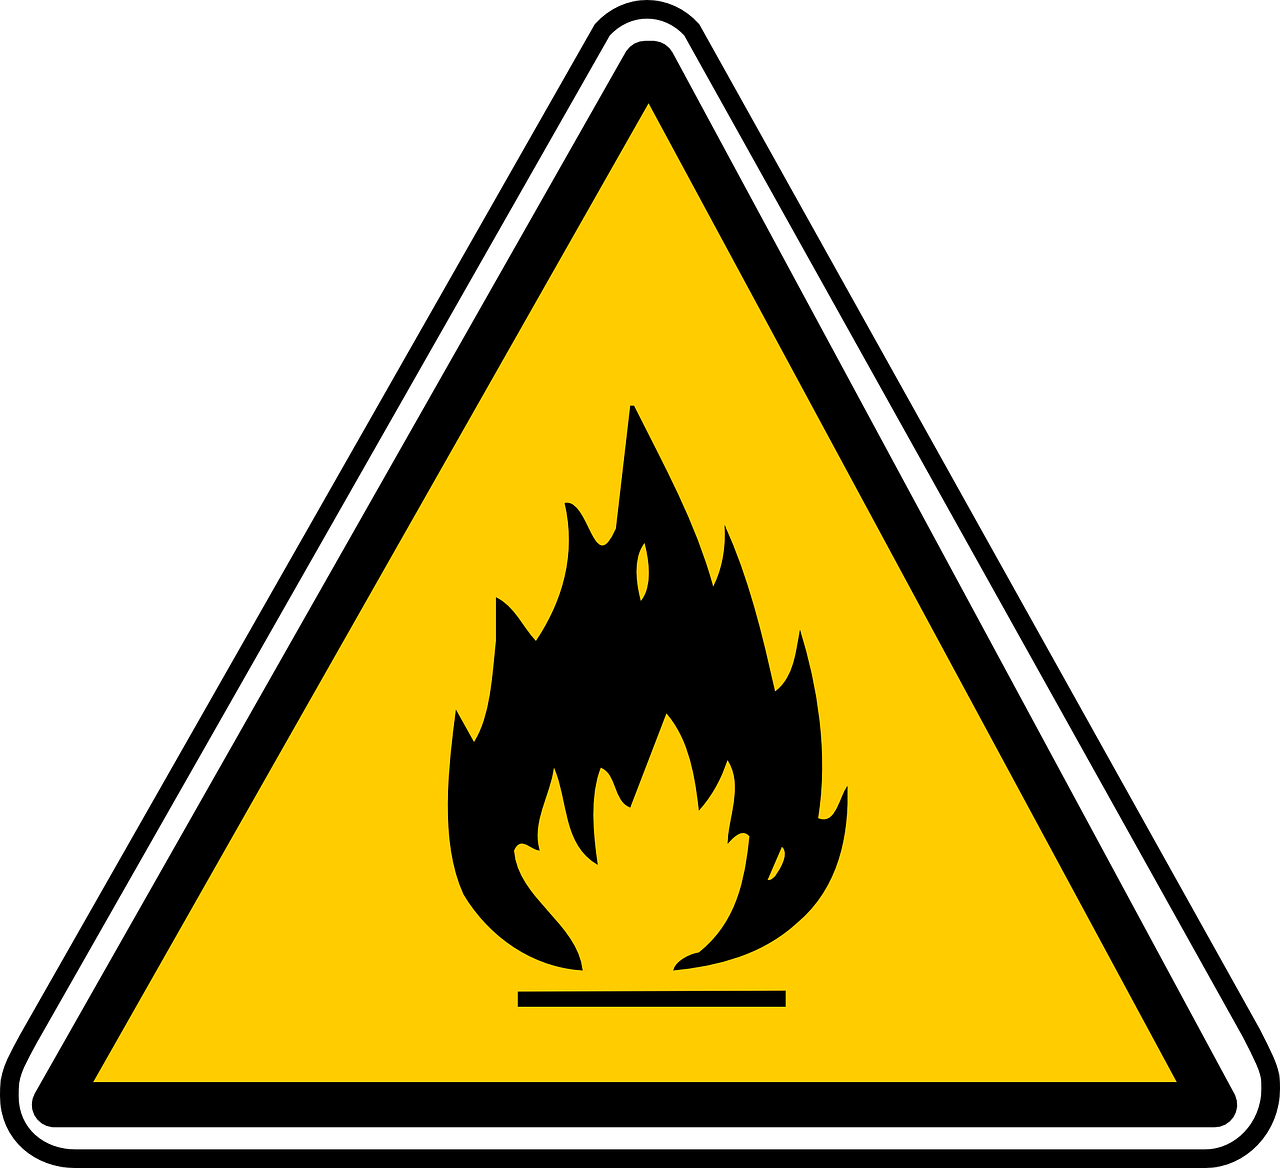 a yellow and black hazard sign on a black background, a picture, renaissance, flames in background, triangle, behaelterverfolgung, high temperature